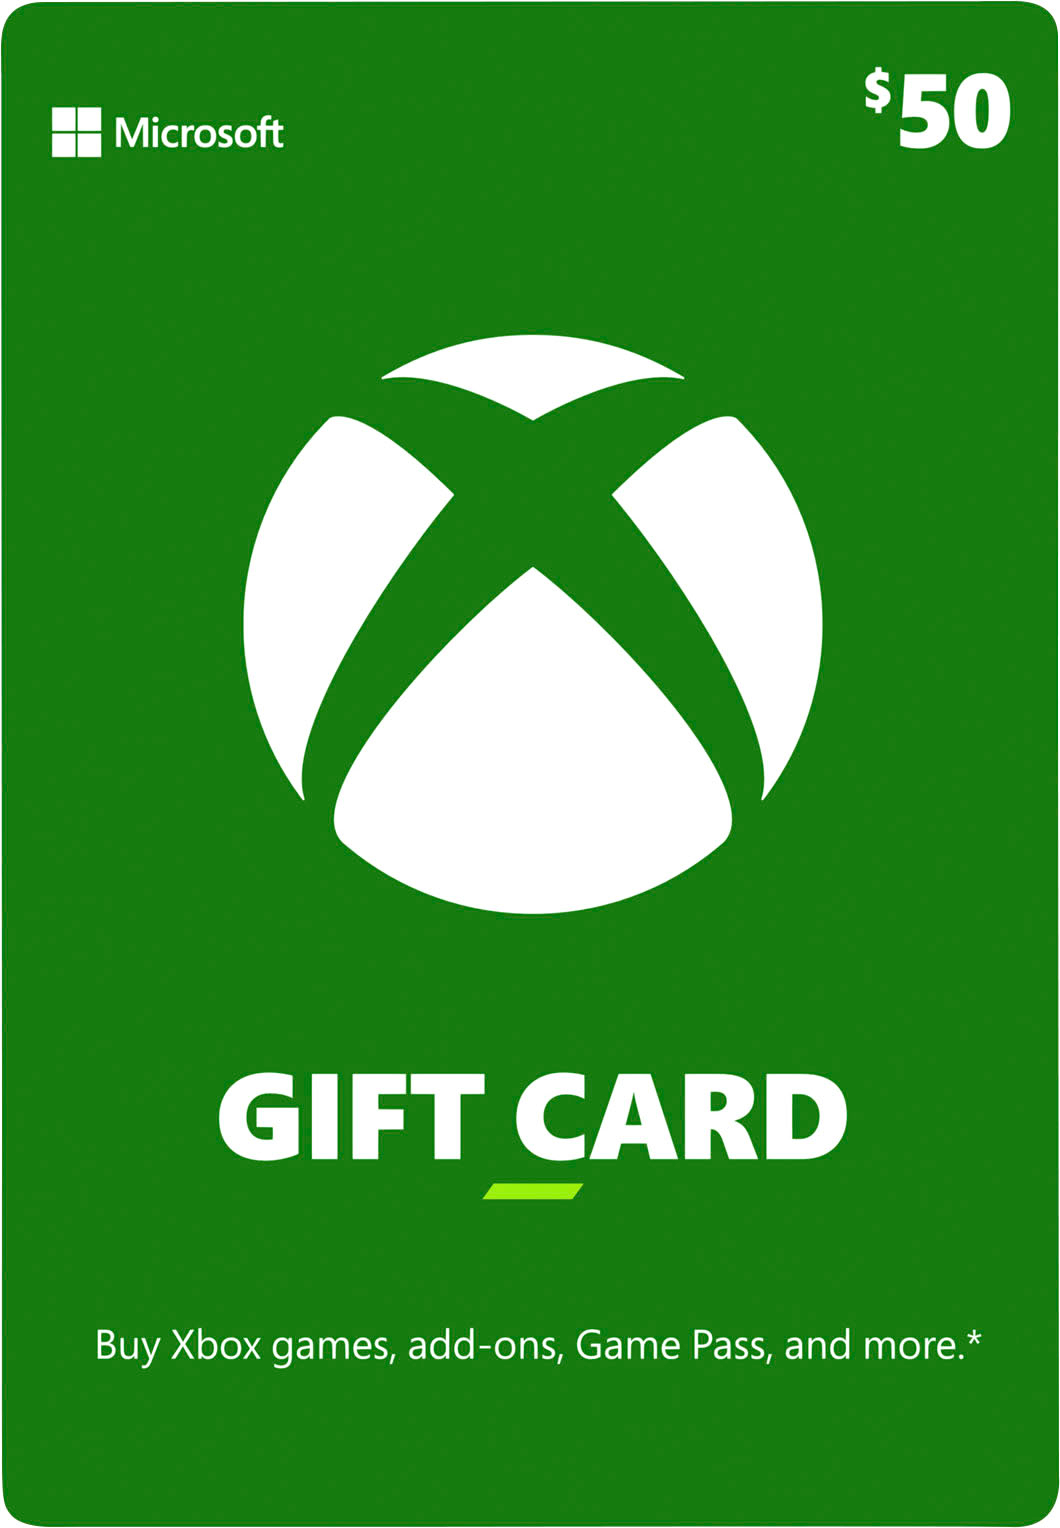 Microsoft Xbox $50 Gift Card (Physical) $45 + Free Store Pickup At Best Buy or Free Shipping